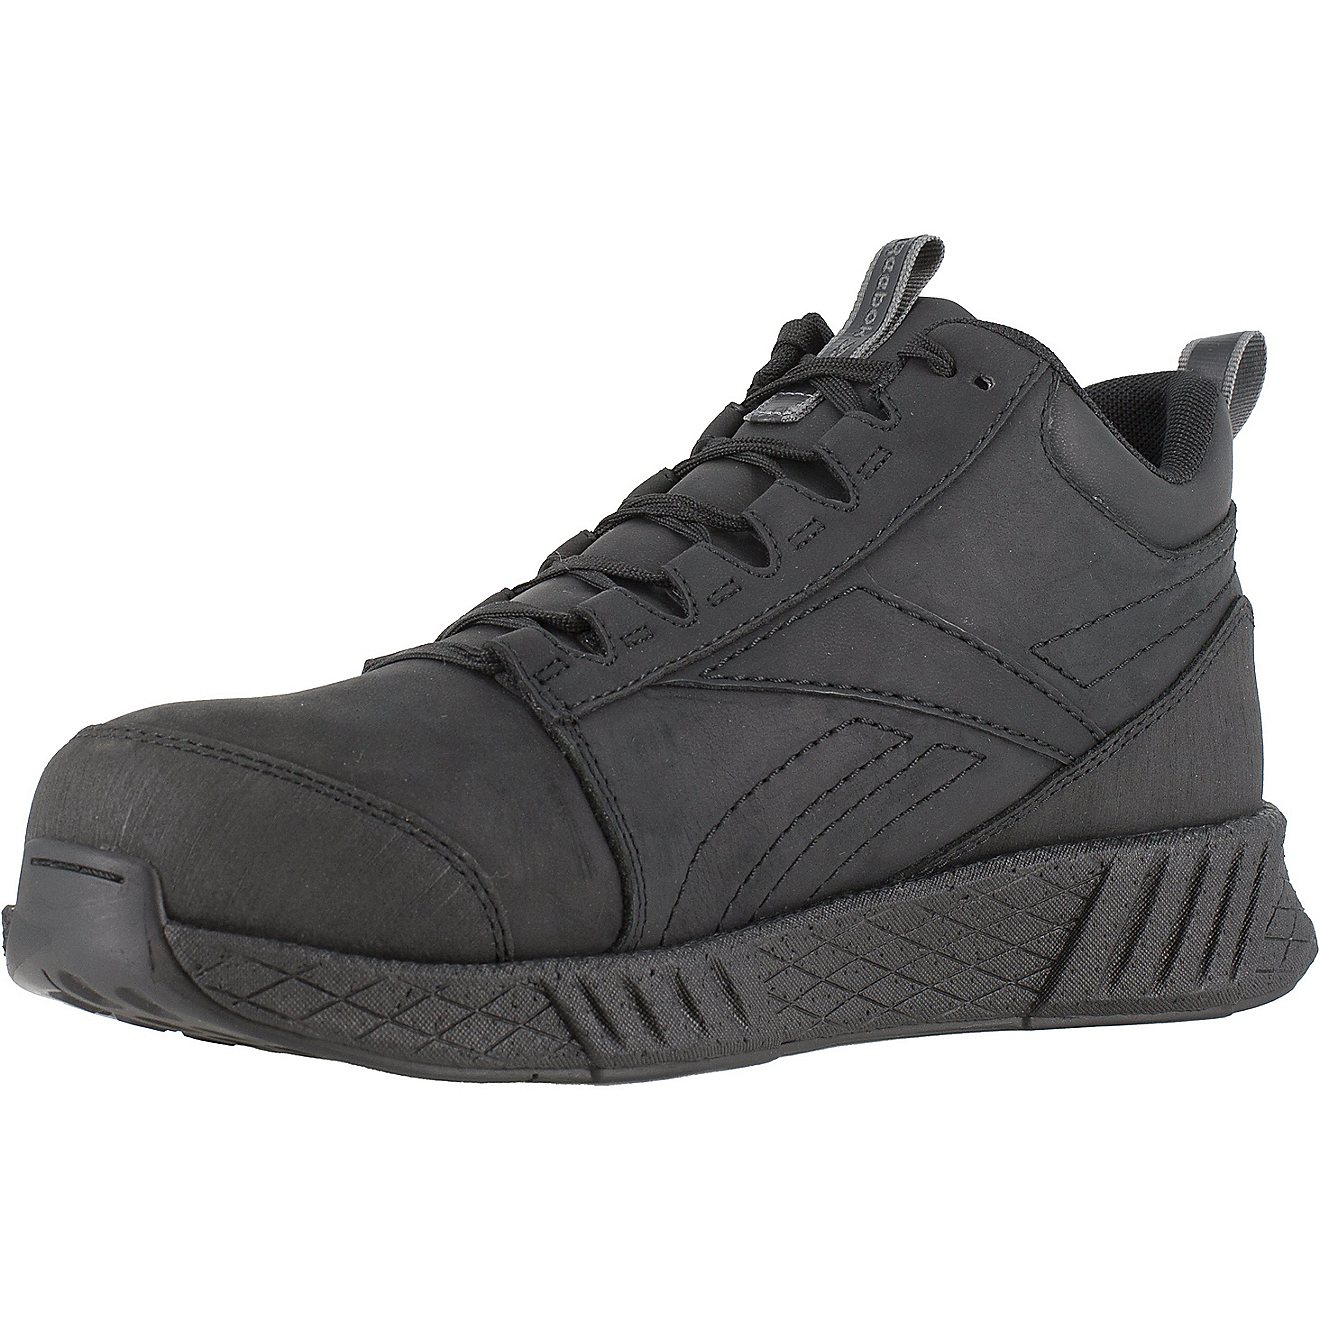 Reebok Men's Fusion Formidable Athletic Mid Cut Work Boots                                                                       - view number 4